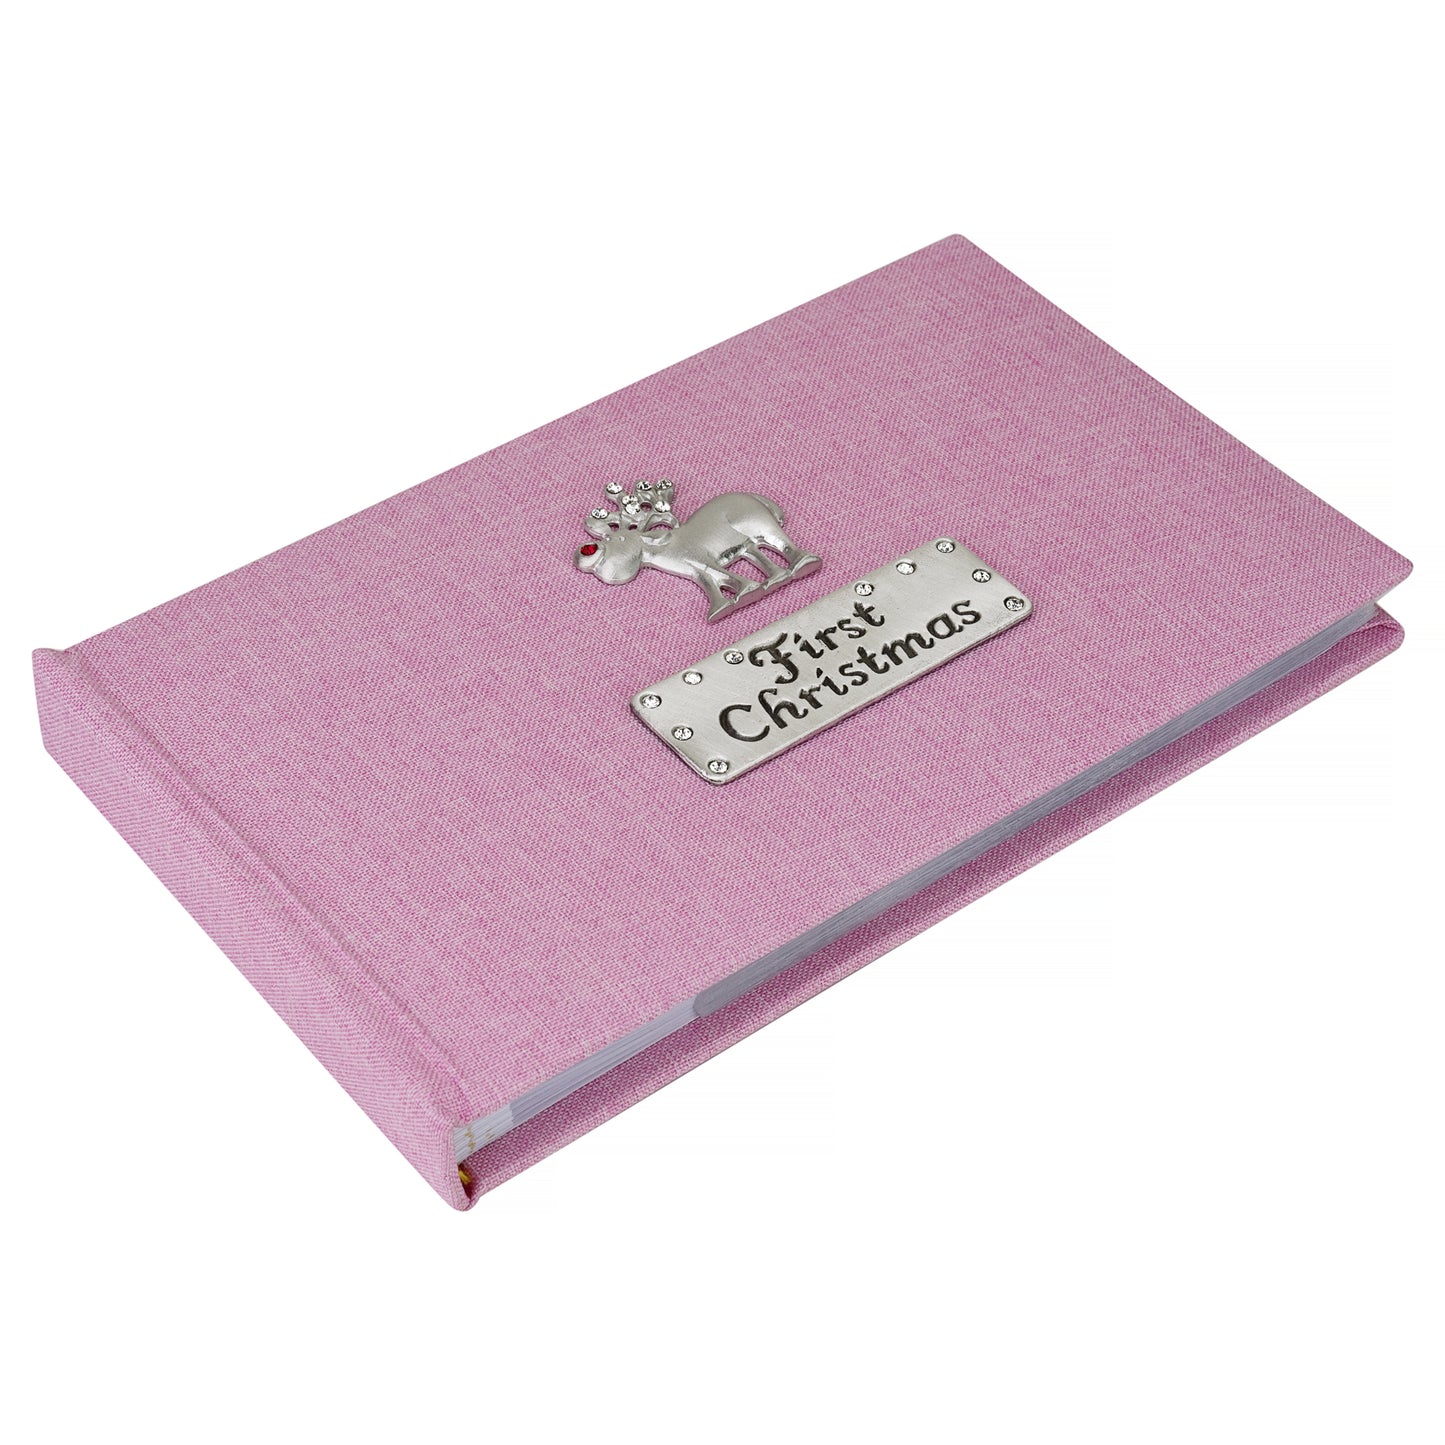 First Christmas Rudolph photo album - White, Pink & Blue